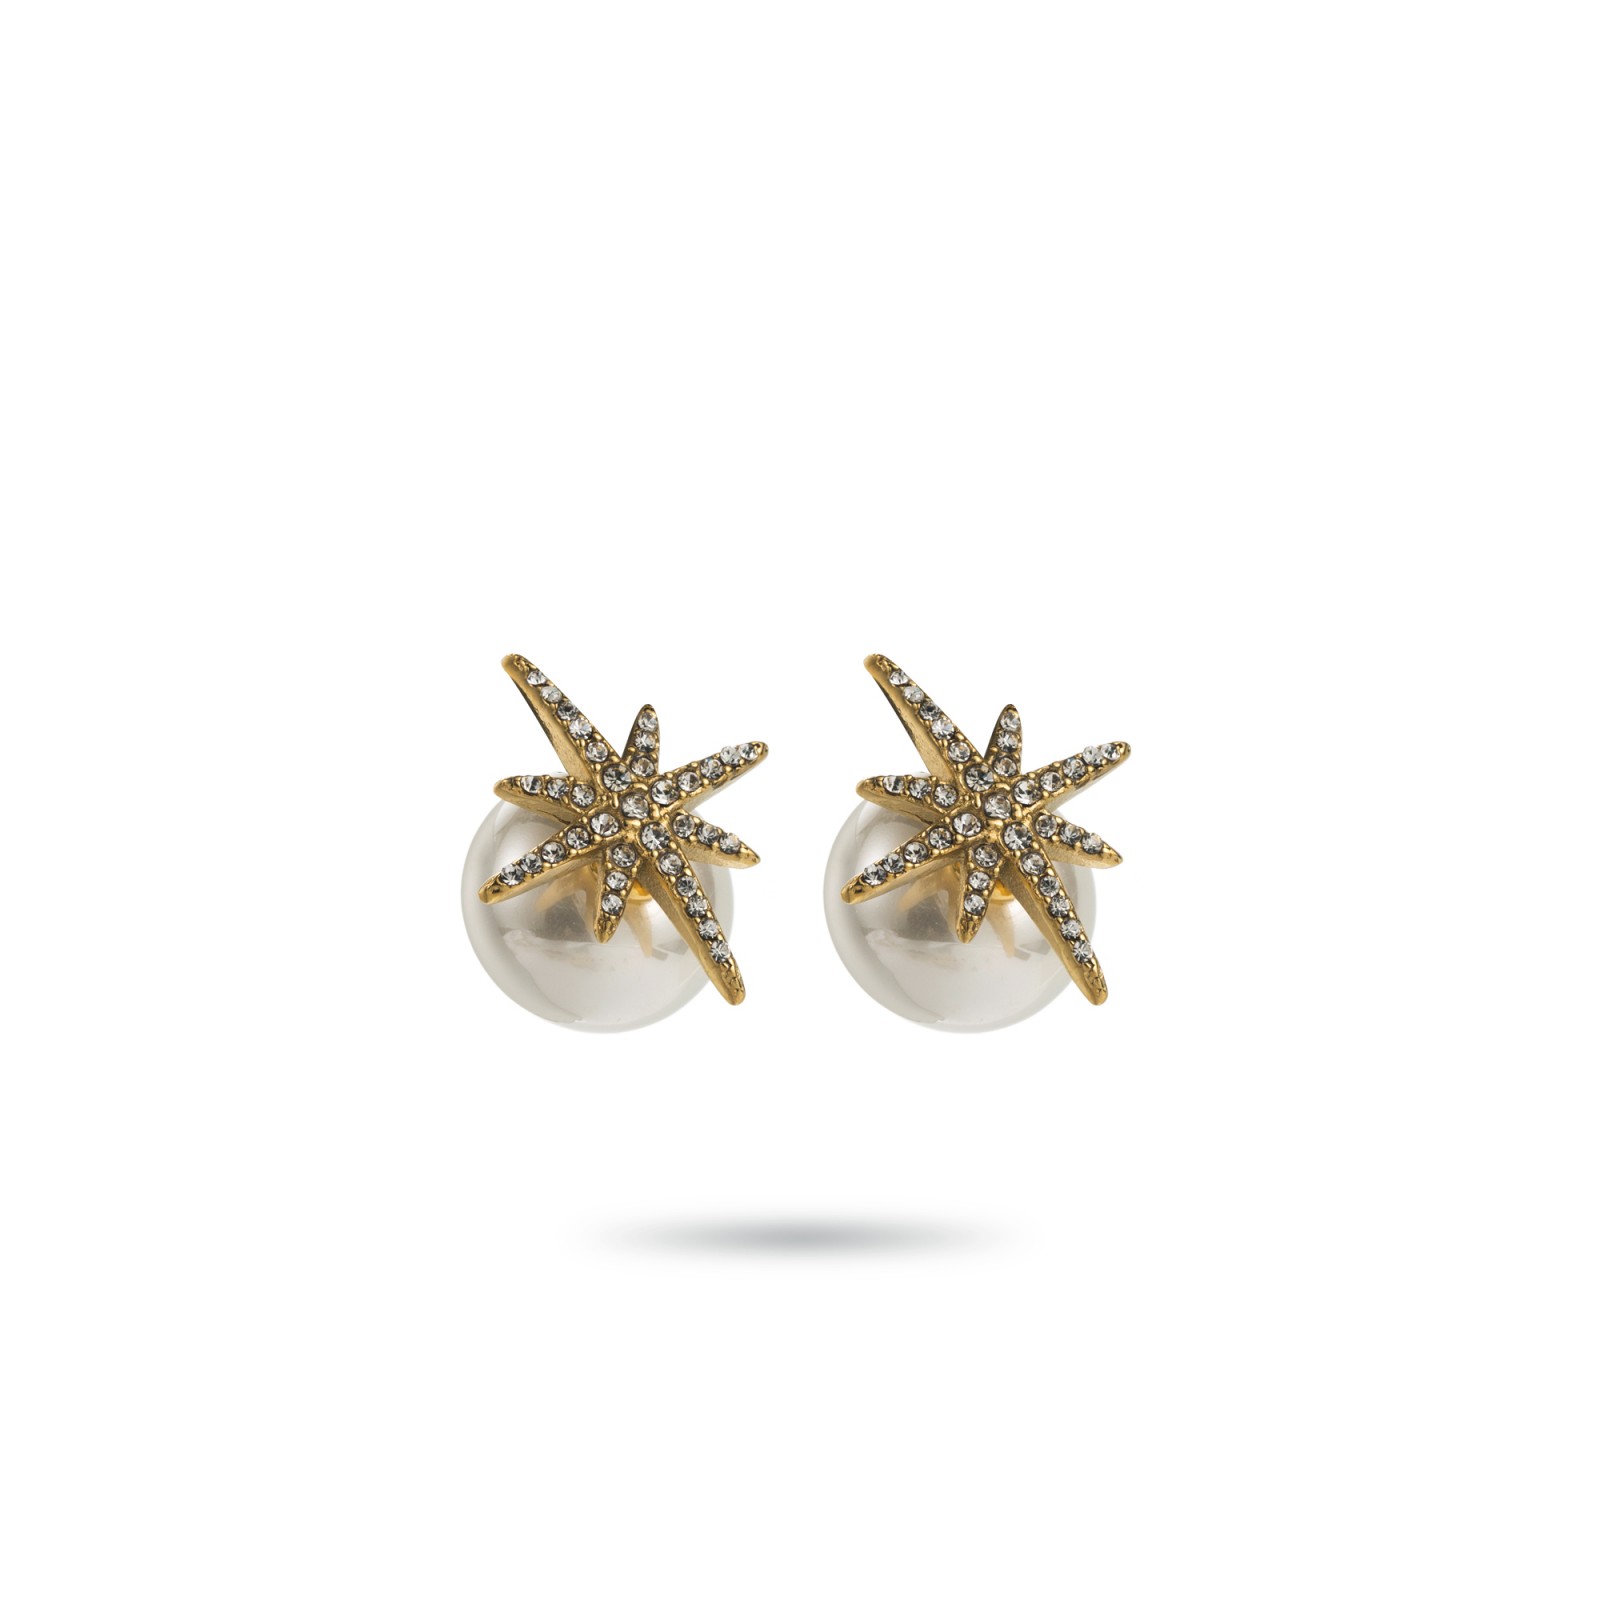 Rhinestone and Mother-of-Pearl Studs Earrings